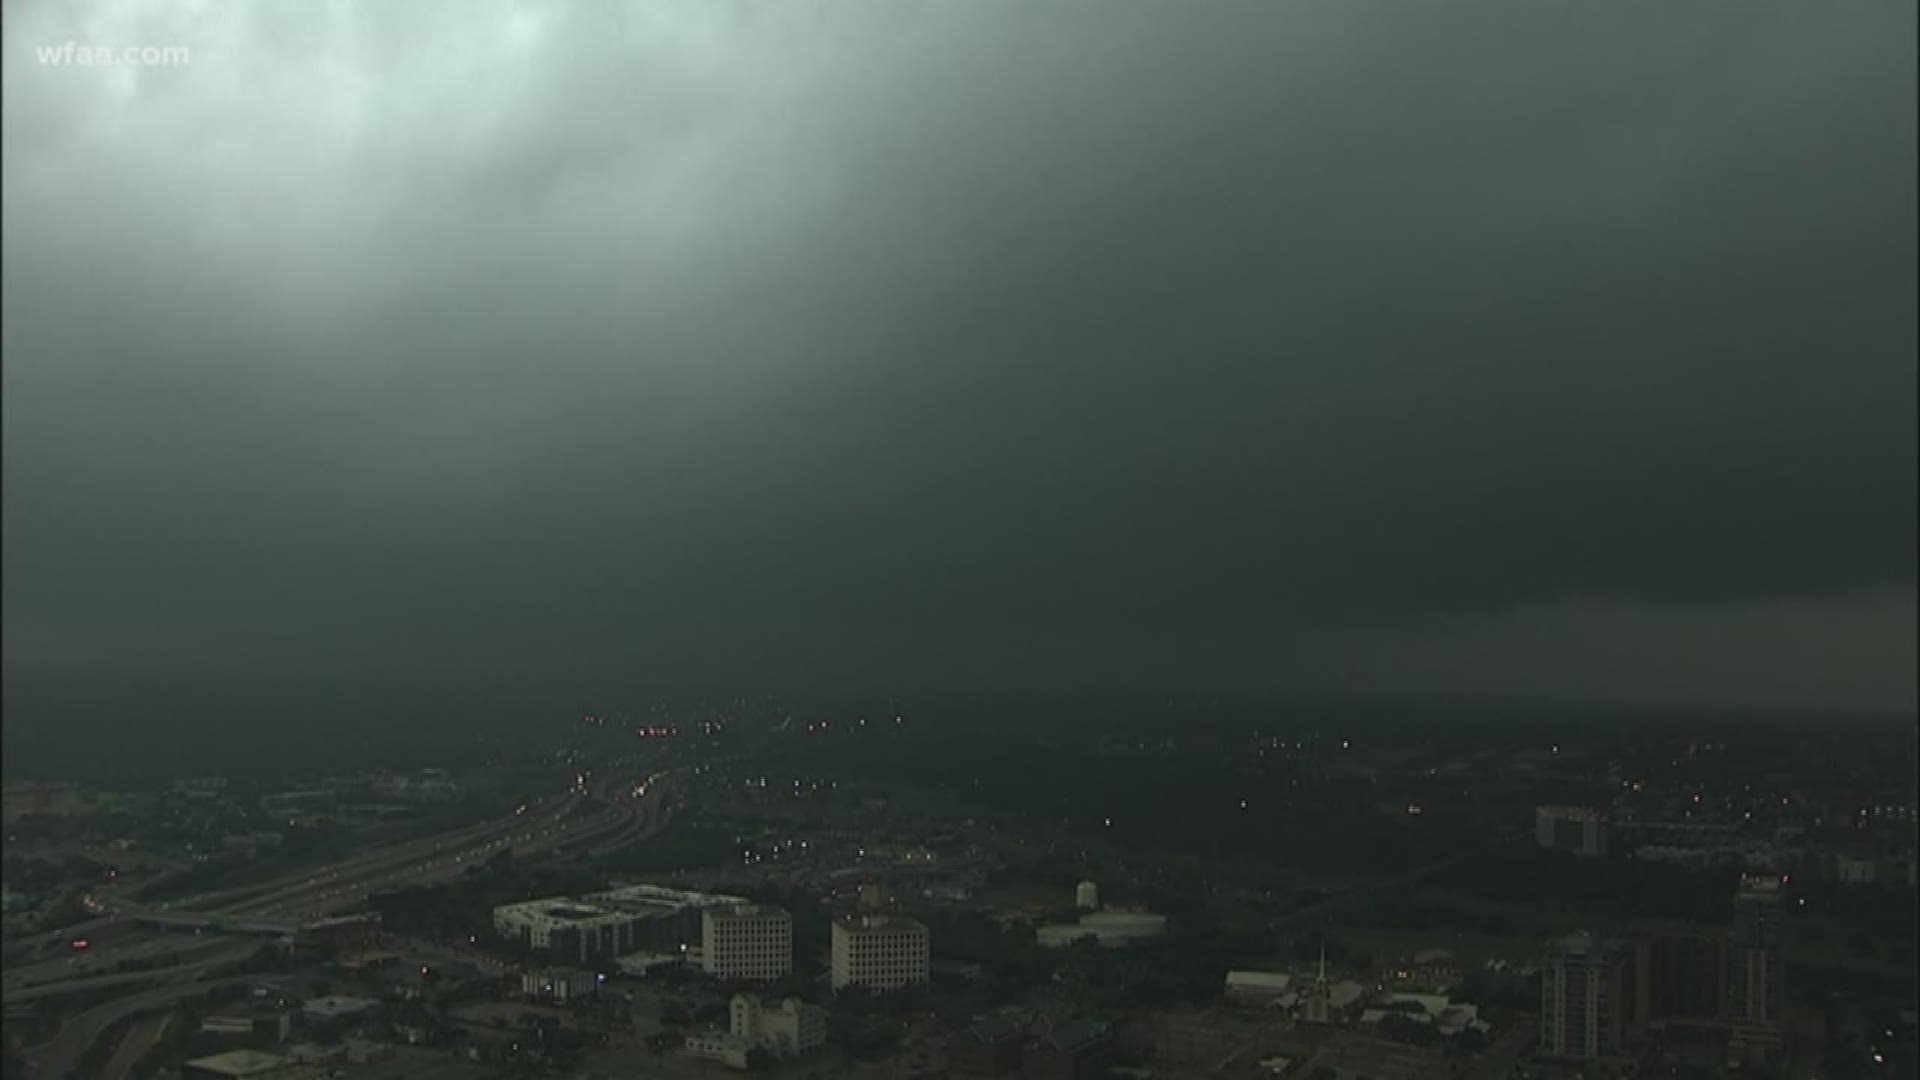 Storms were passing through North Texas on Saturday evening.